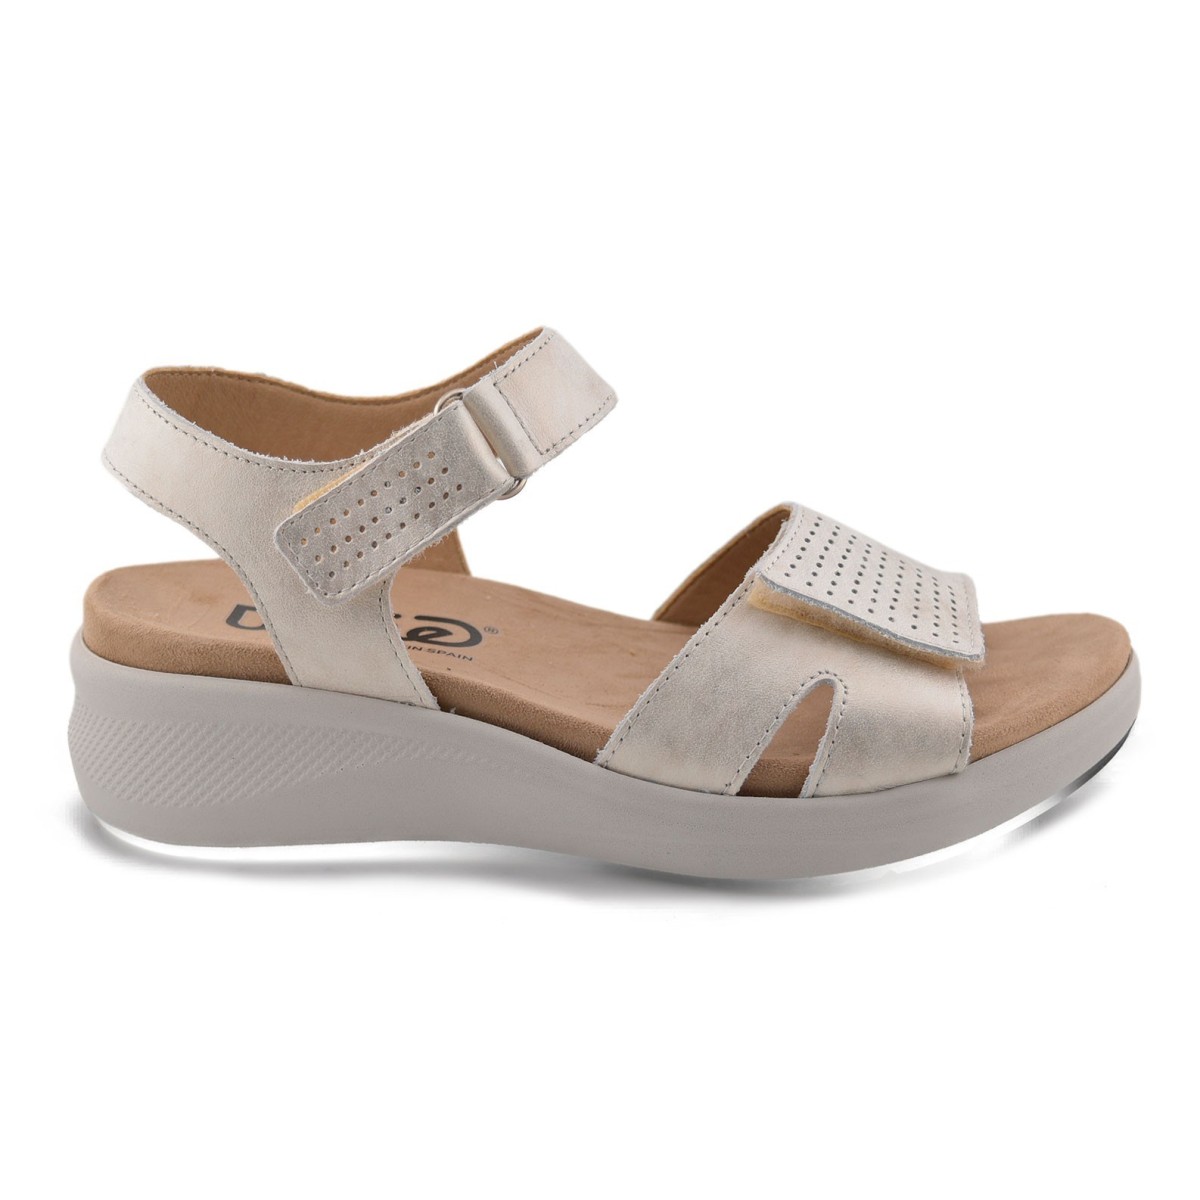 Beige leather wedge sandals by Tupie